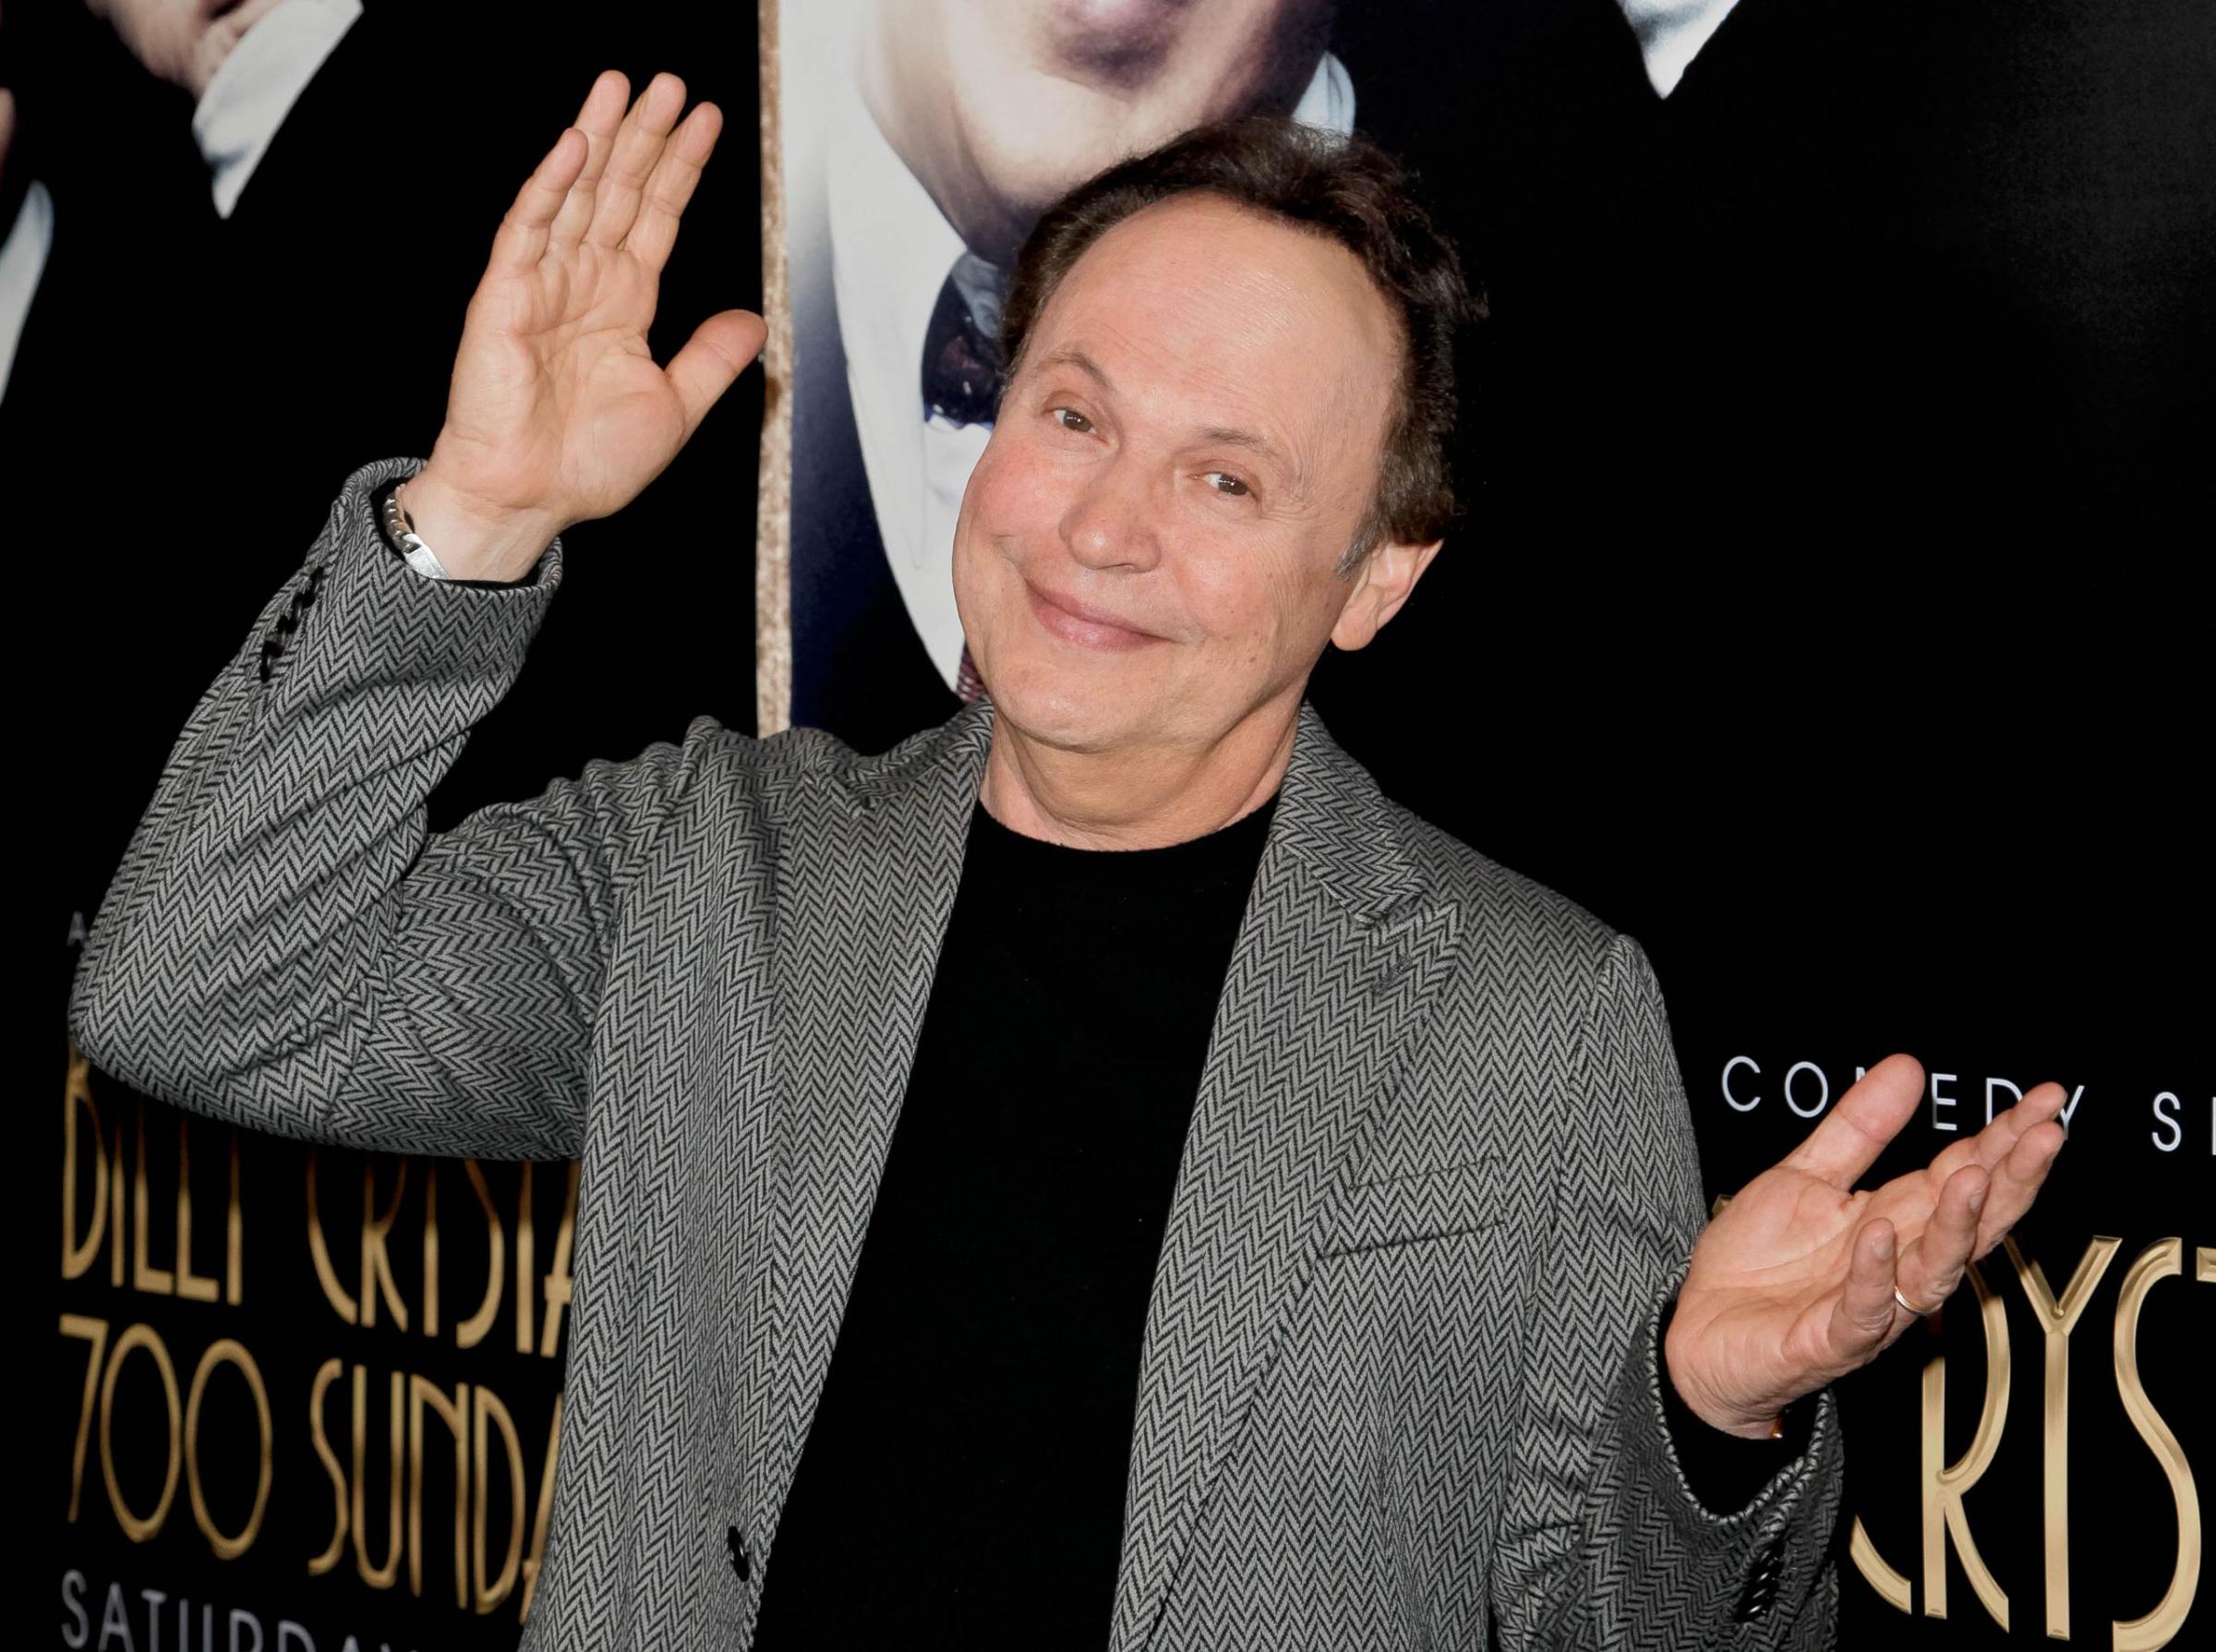 HBO Presents Exclusive Presentation Of "Billy Crystal 700 Sundays"